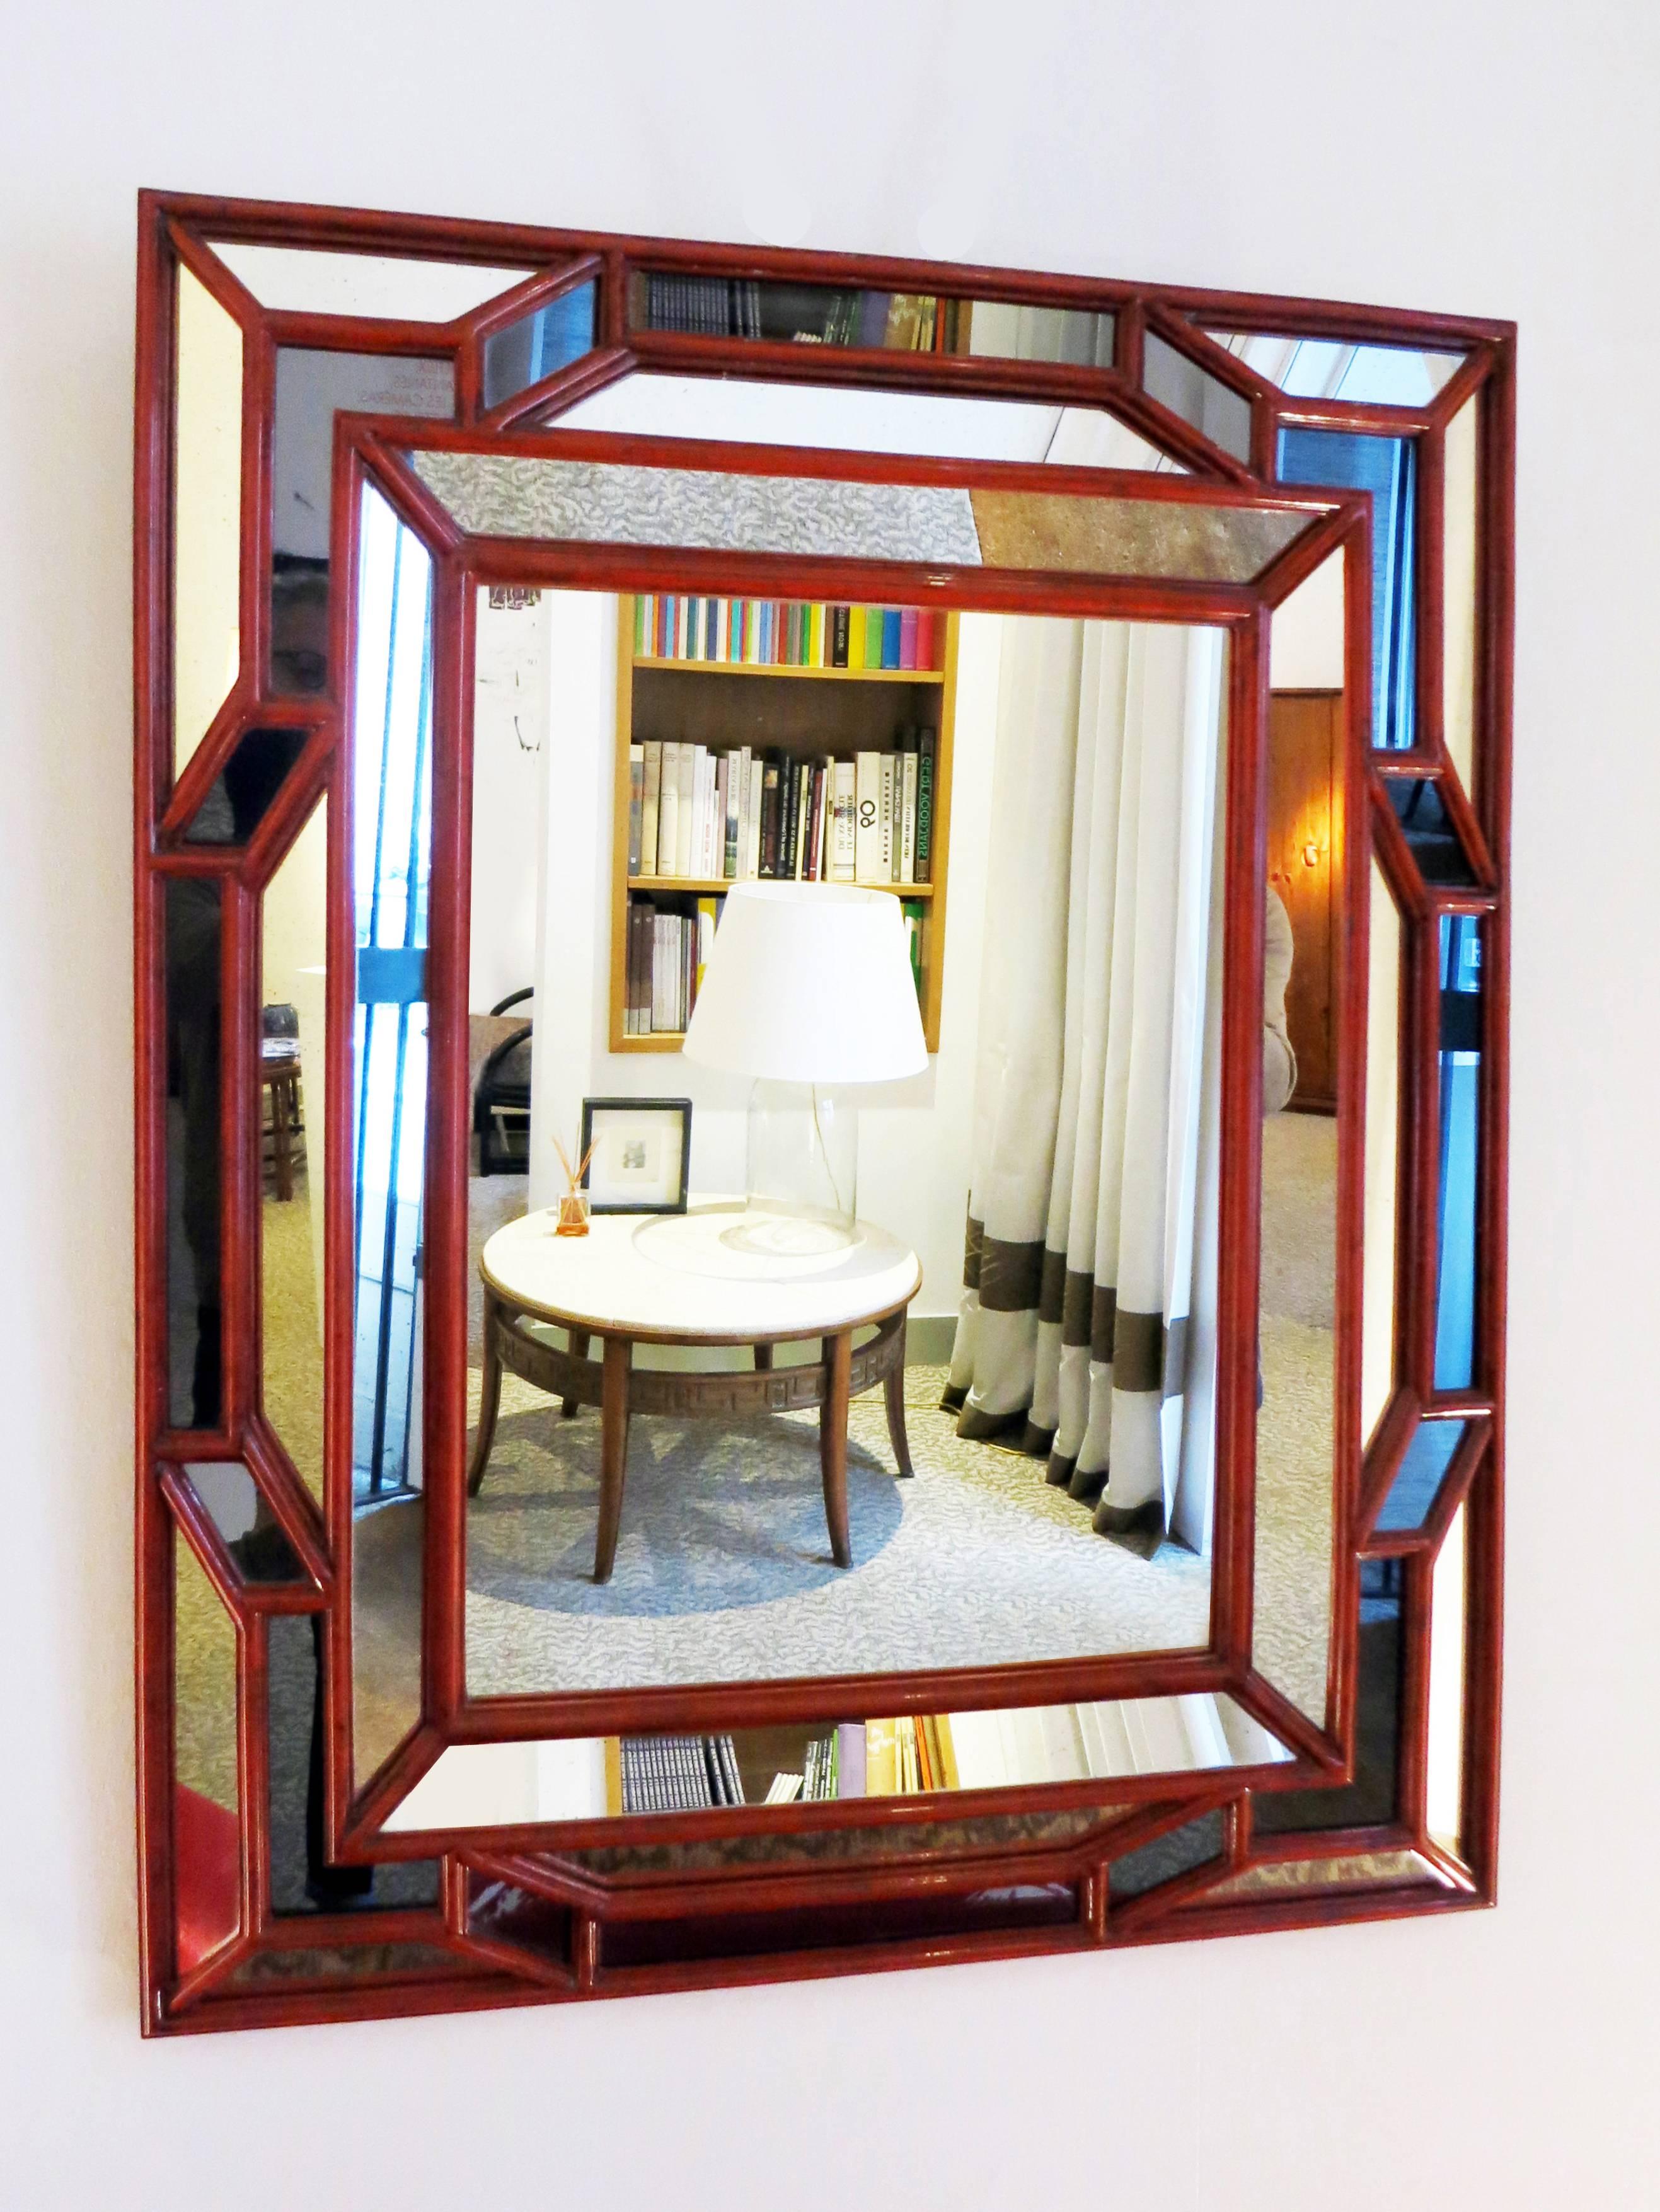 Spectacular faceted mirror from Galerie Maison et Jardin, circa 1970.
Grey and colorless pieces of mirror between Hermes red lacquered wood molded sticks.
Designed in 17th century style.
Perfect condition.